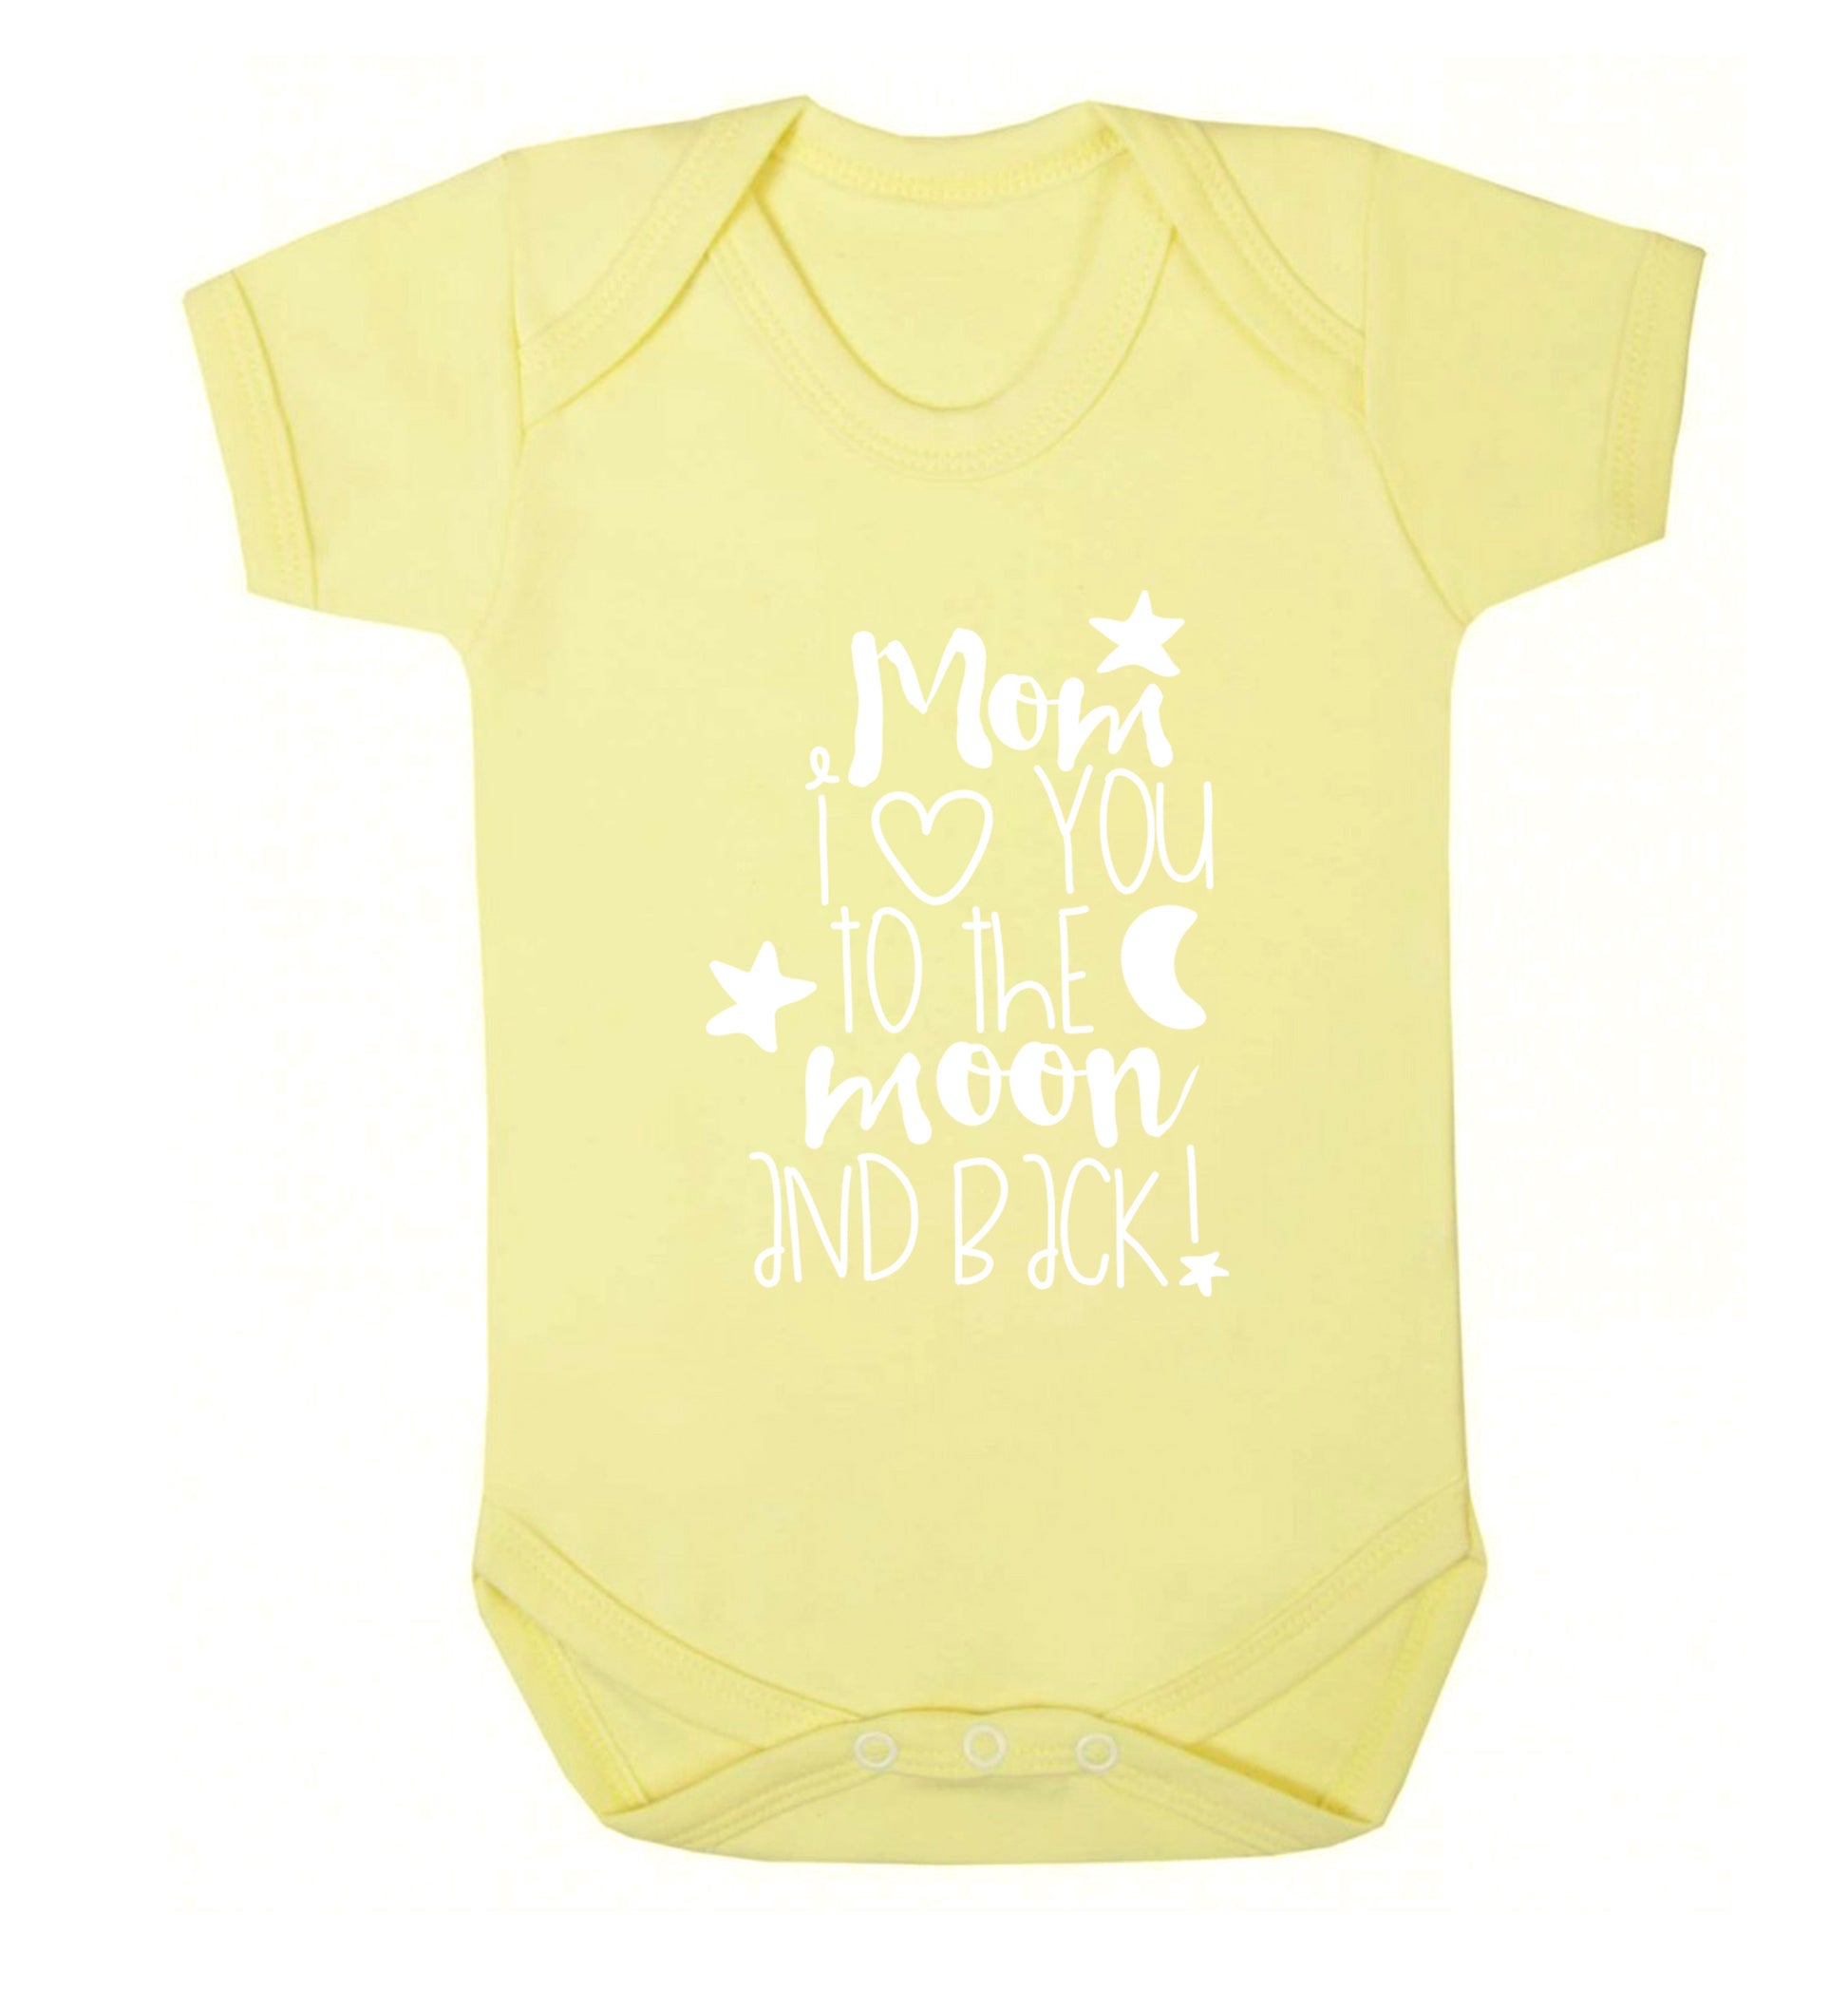 Dad I love you to the moon and back Baby Vest pale yellow 18-24 months